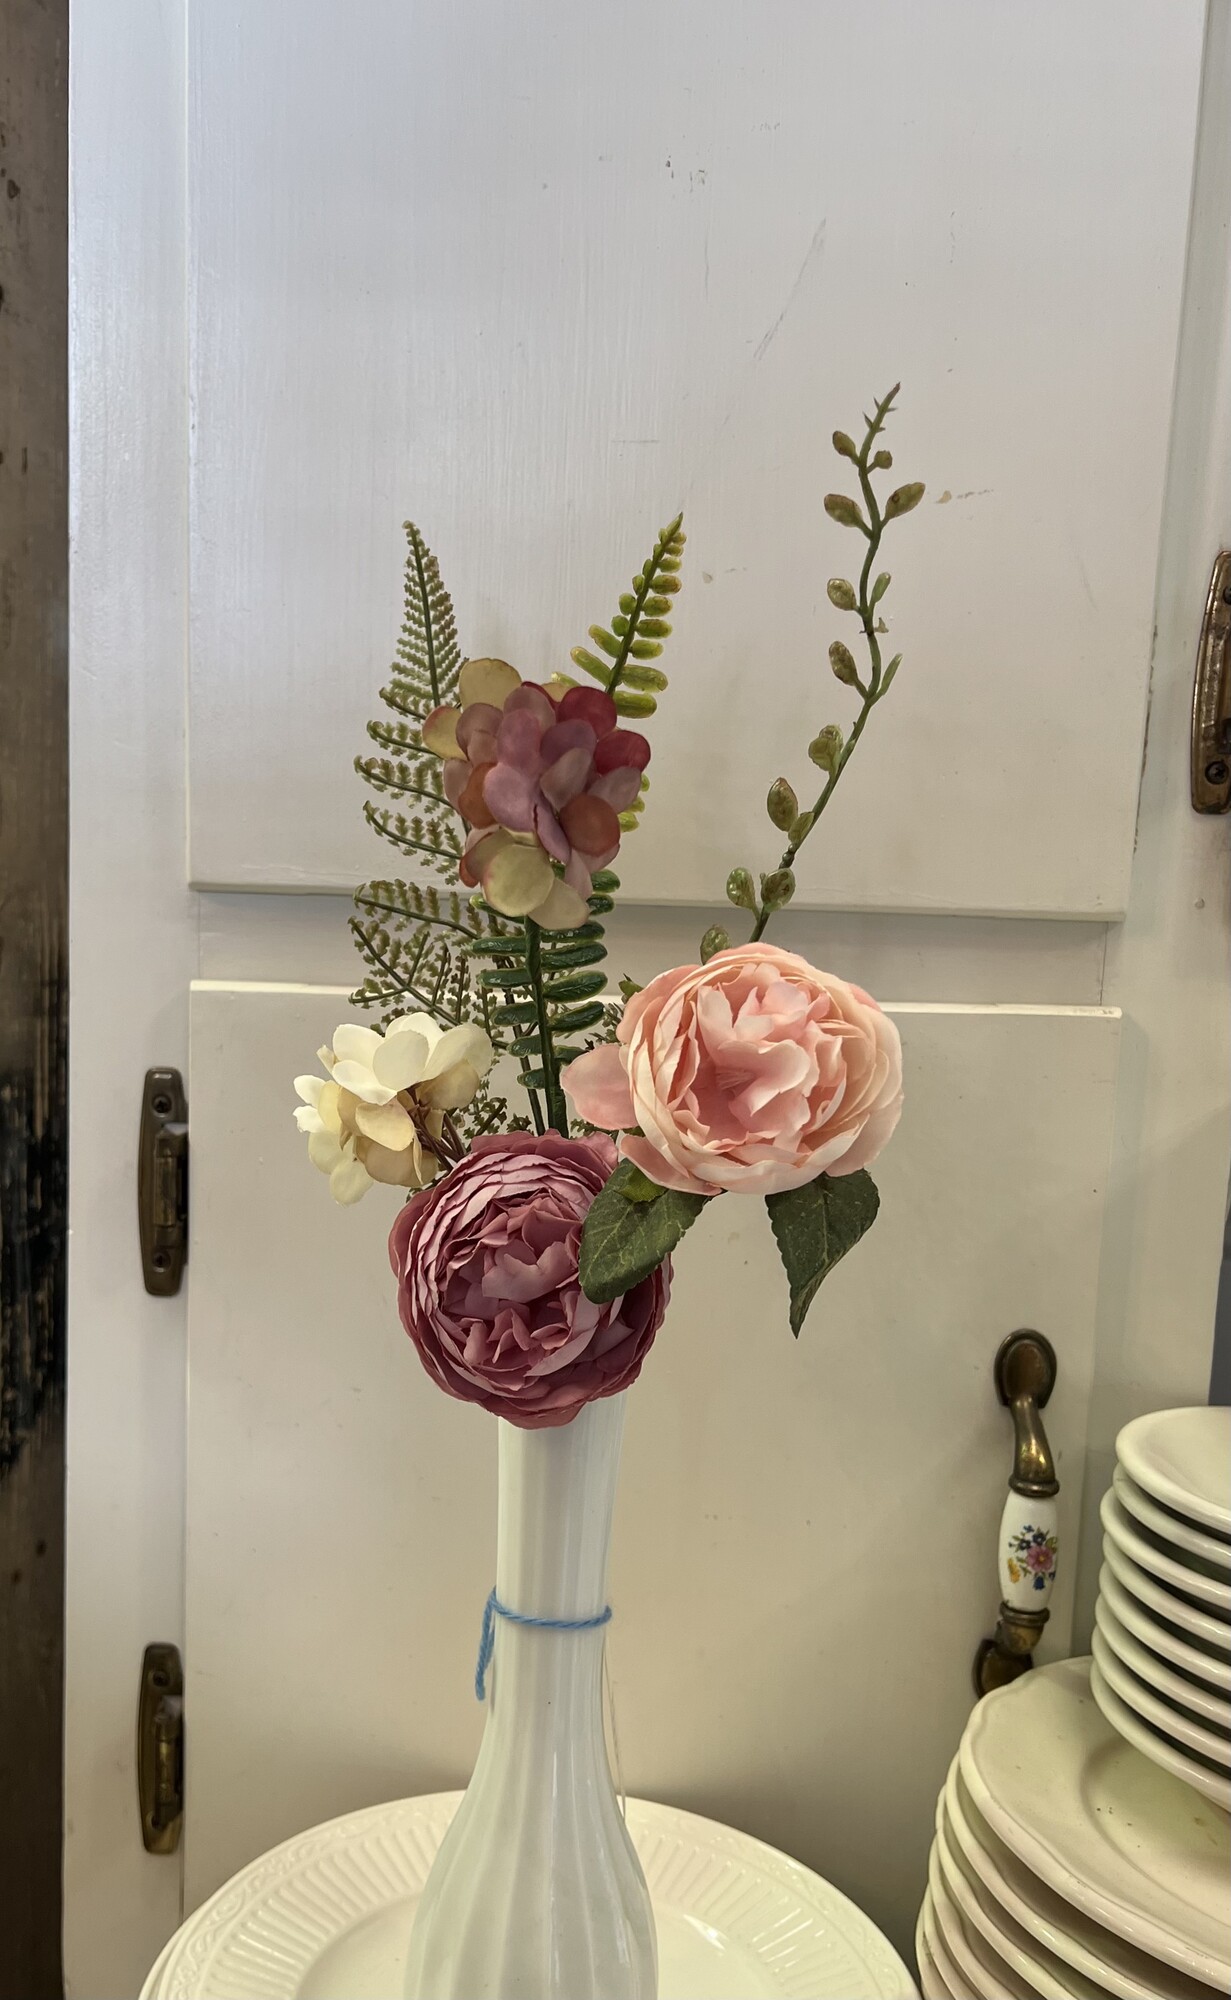 Add a touch of spring to your home with this Peony Spray.  This pretty floral has peonies, small hydrangeas and a few sprigs of ferns. Just drop it any stem vase for a perfect touch
Spray measures 16 inches in height